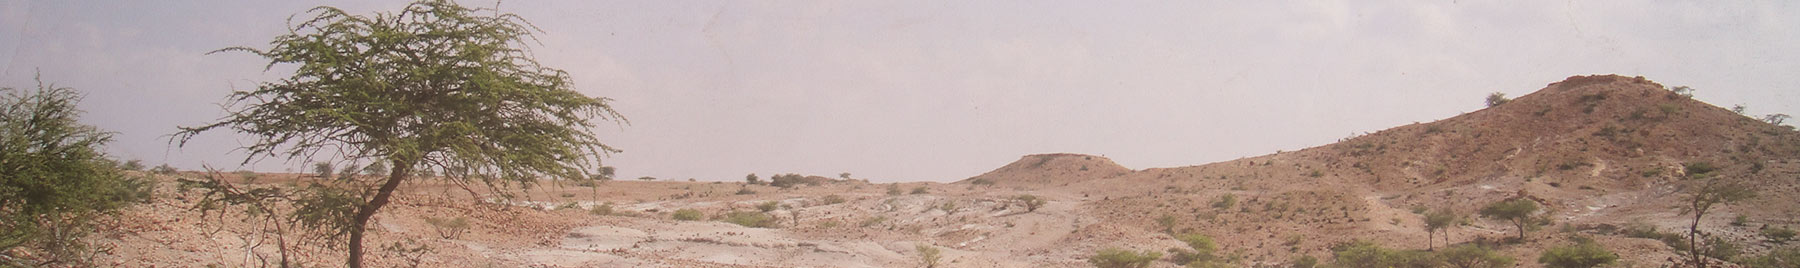 rugged Somali countryside with a few trees